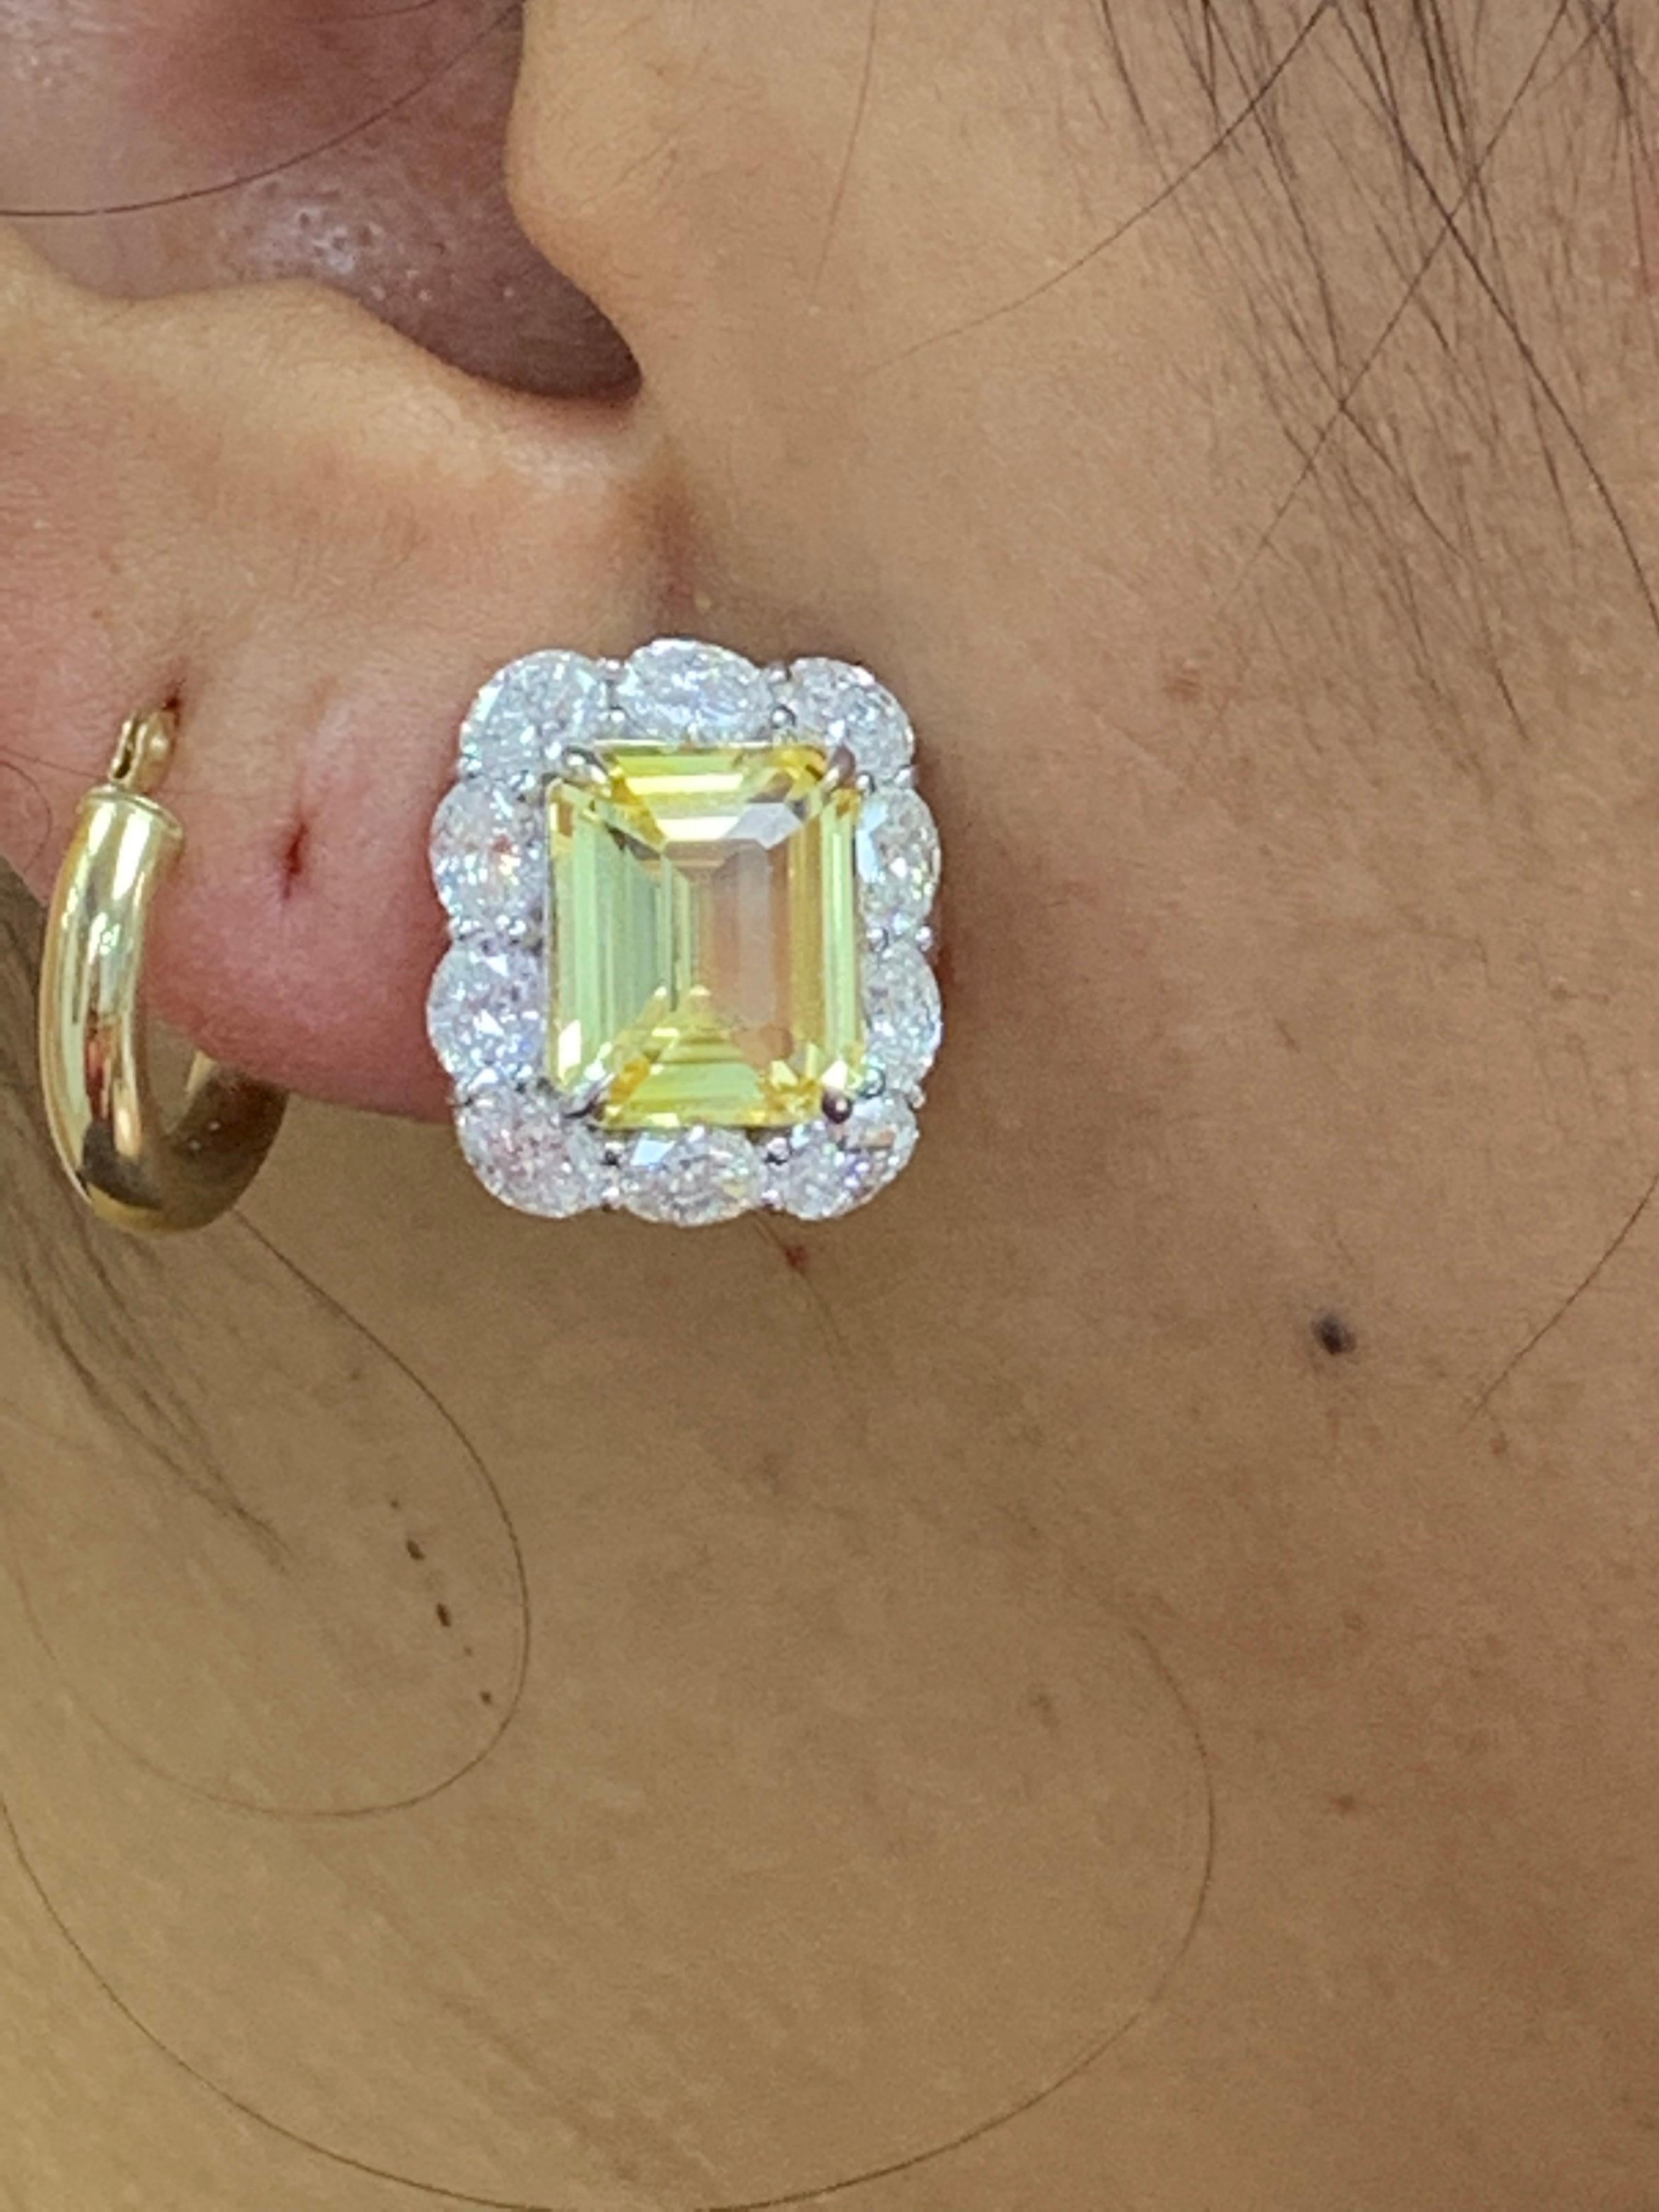 10.09 Carat Emerald Cut Yellow Sapphire Diamond Halo Earring in 18K White Gold For Sale 7